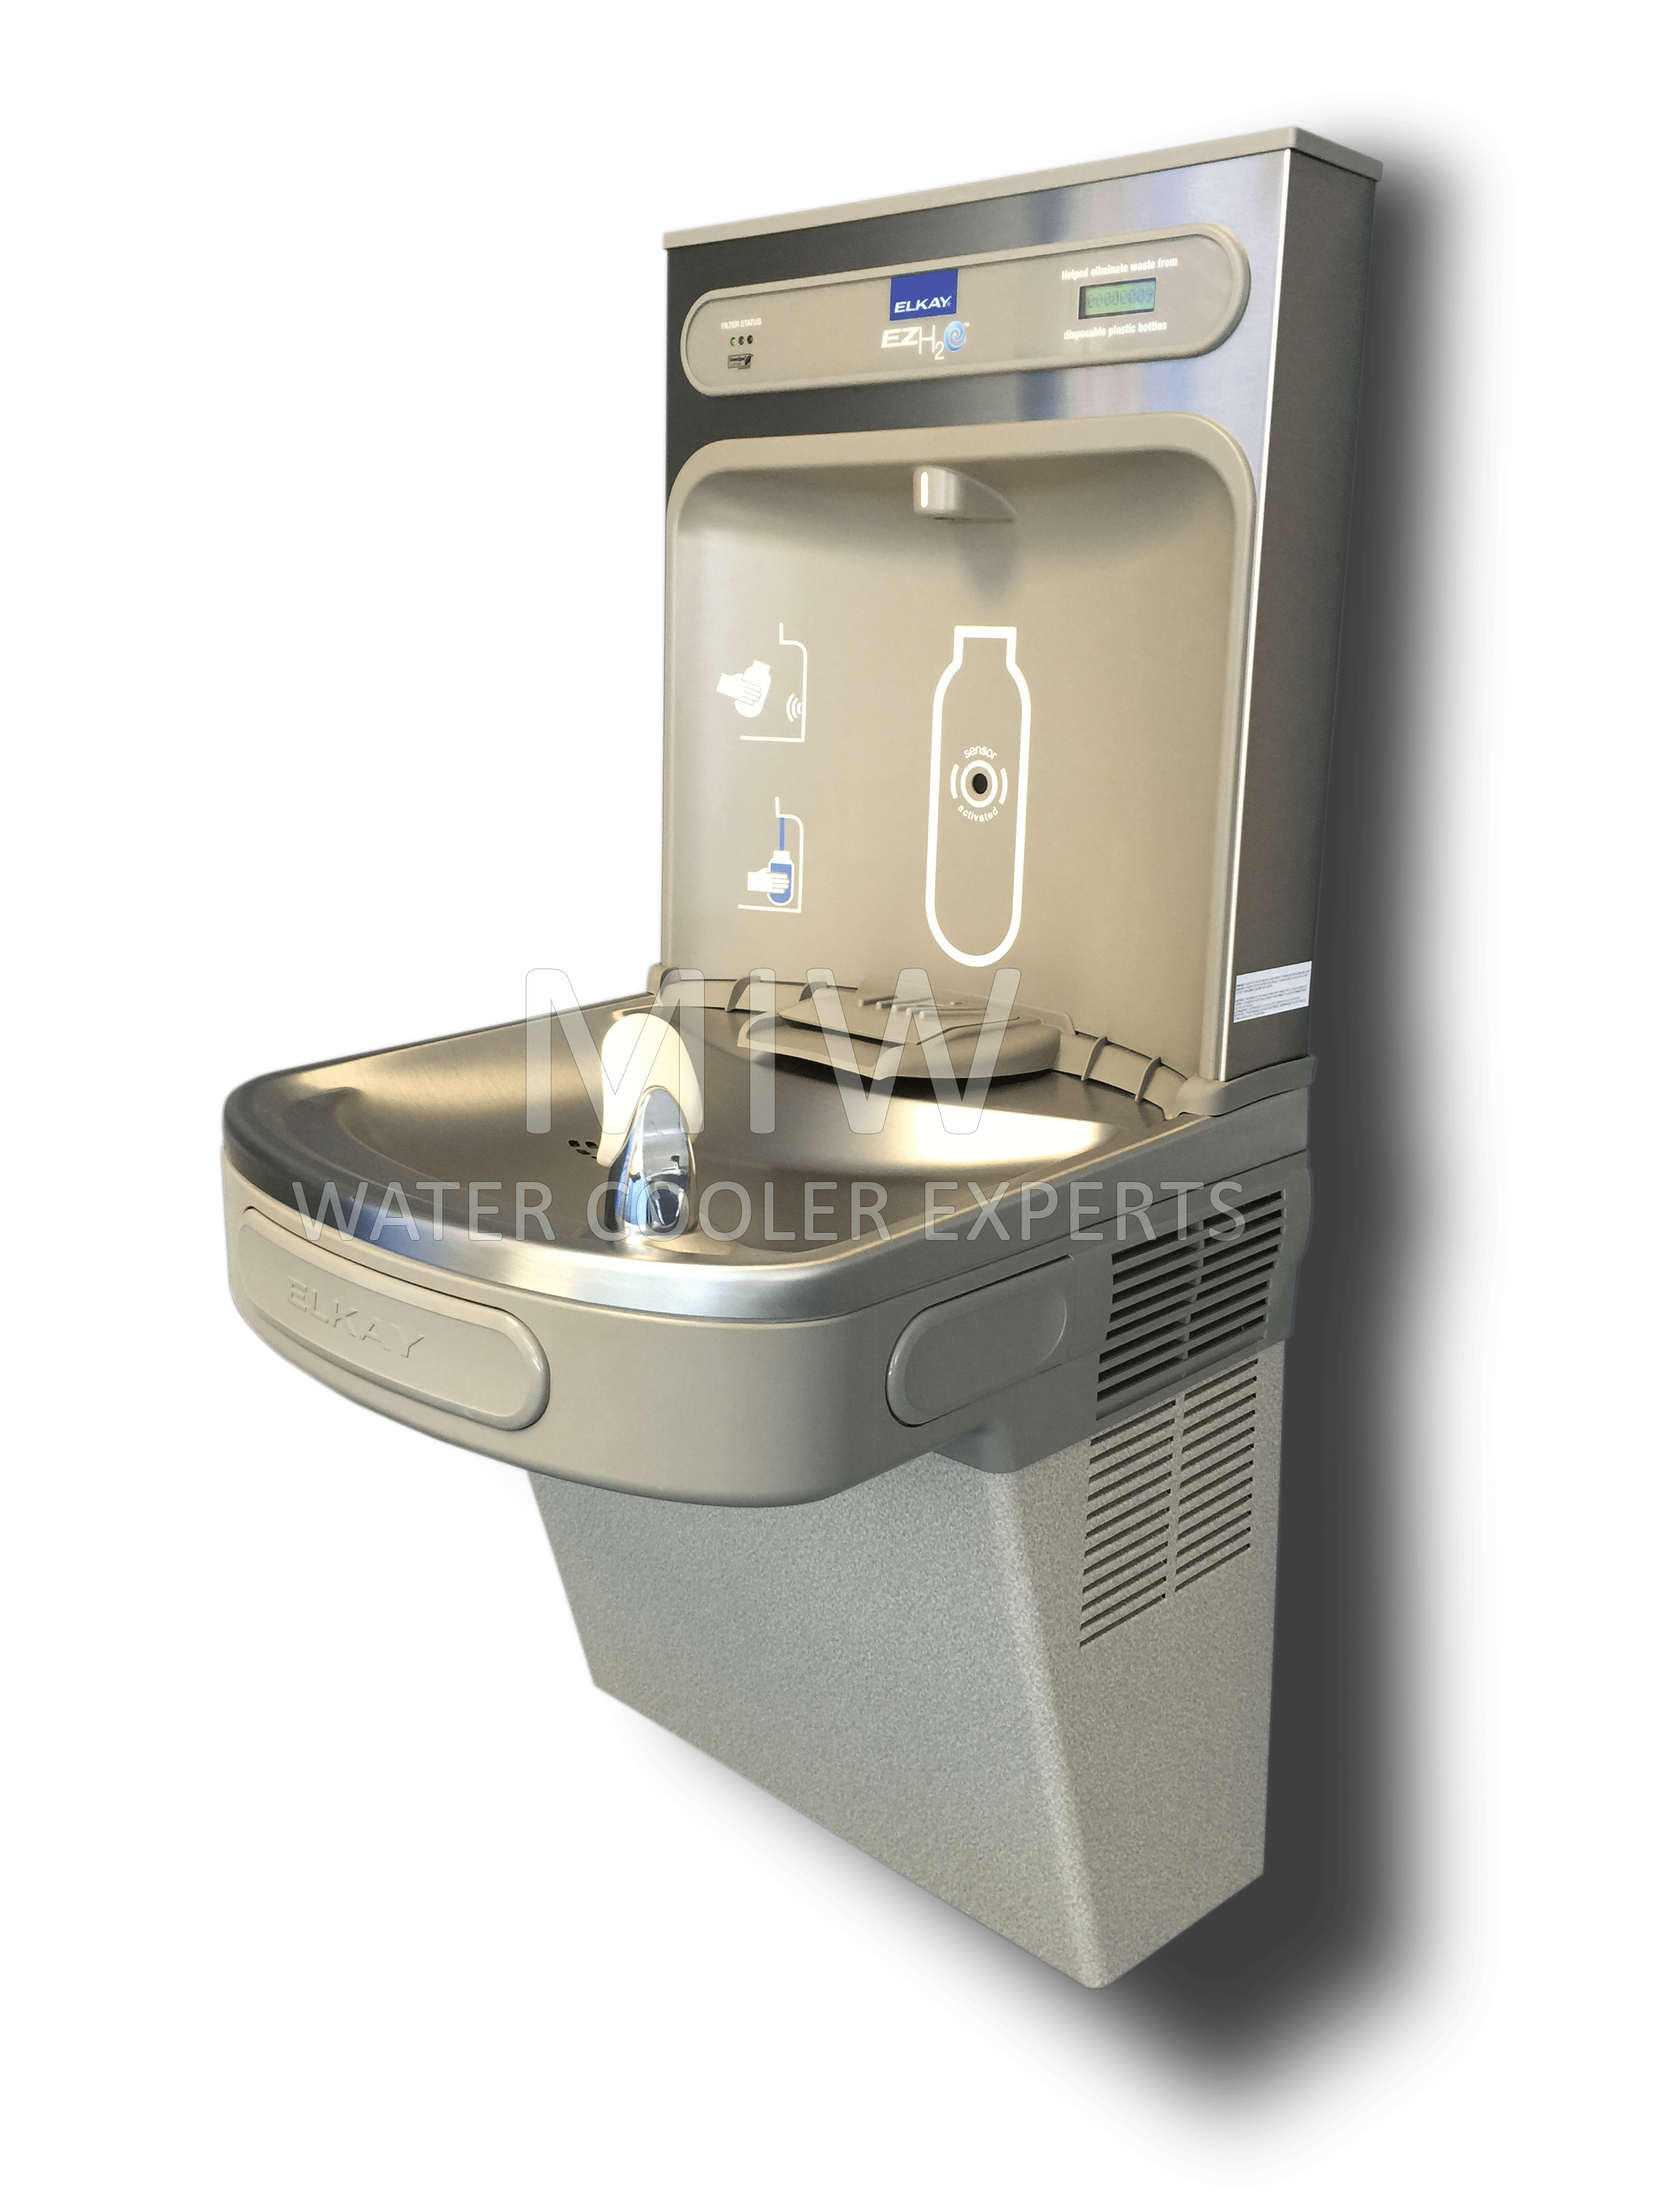 Elkay Bottle Filler Water Cooler Provided By MIW To Bank of England